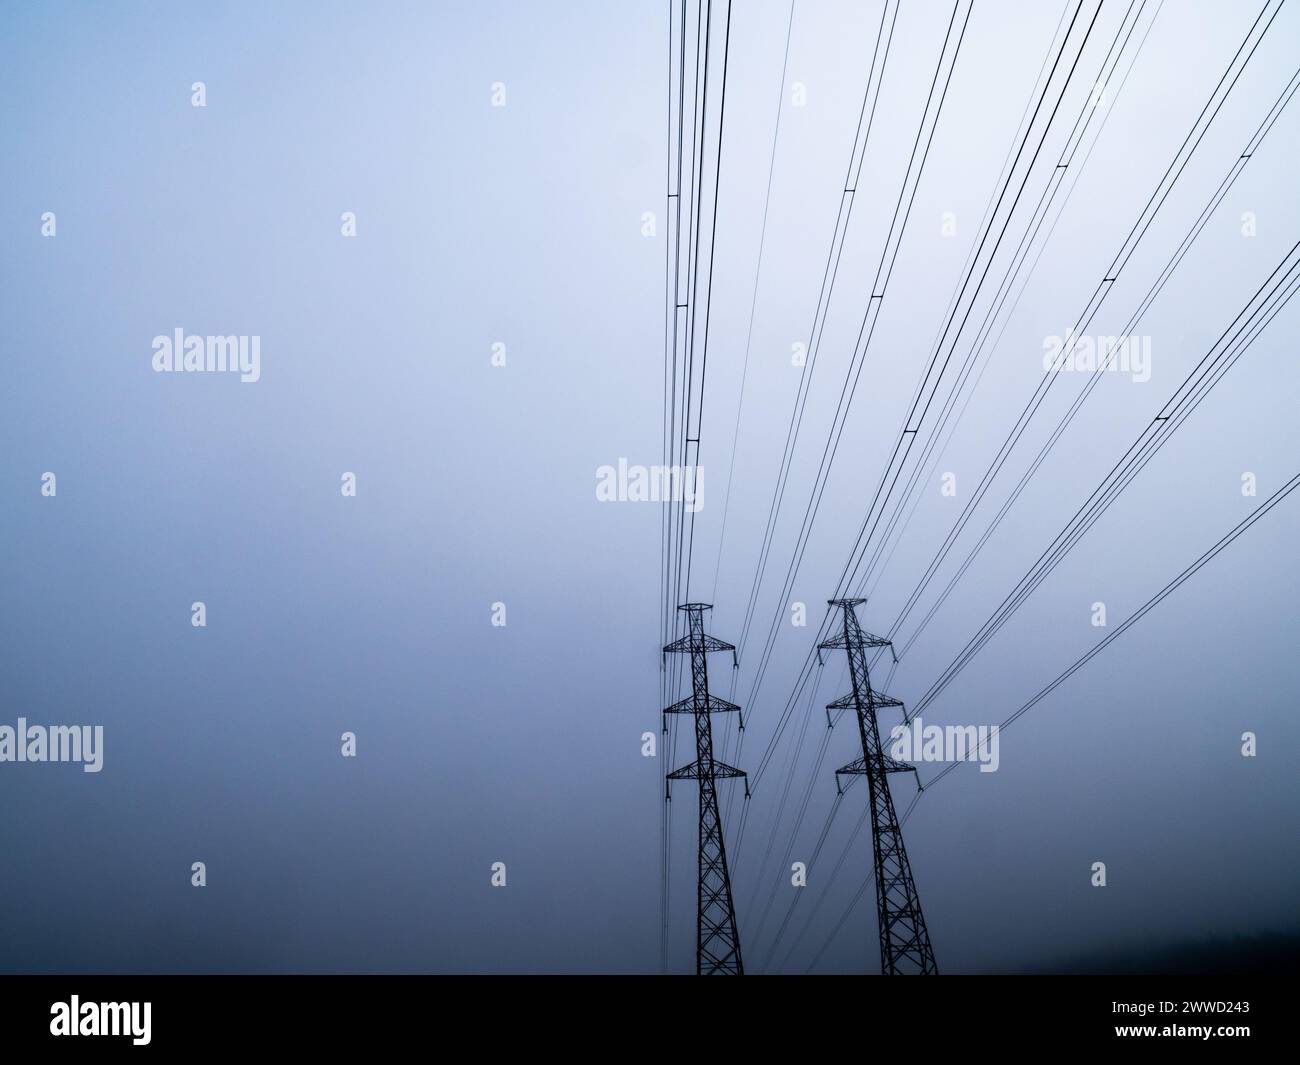 High voltage power line silhouette in foggy morning against white sky Stock Photo